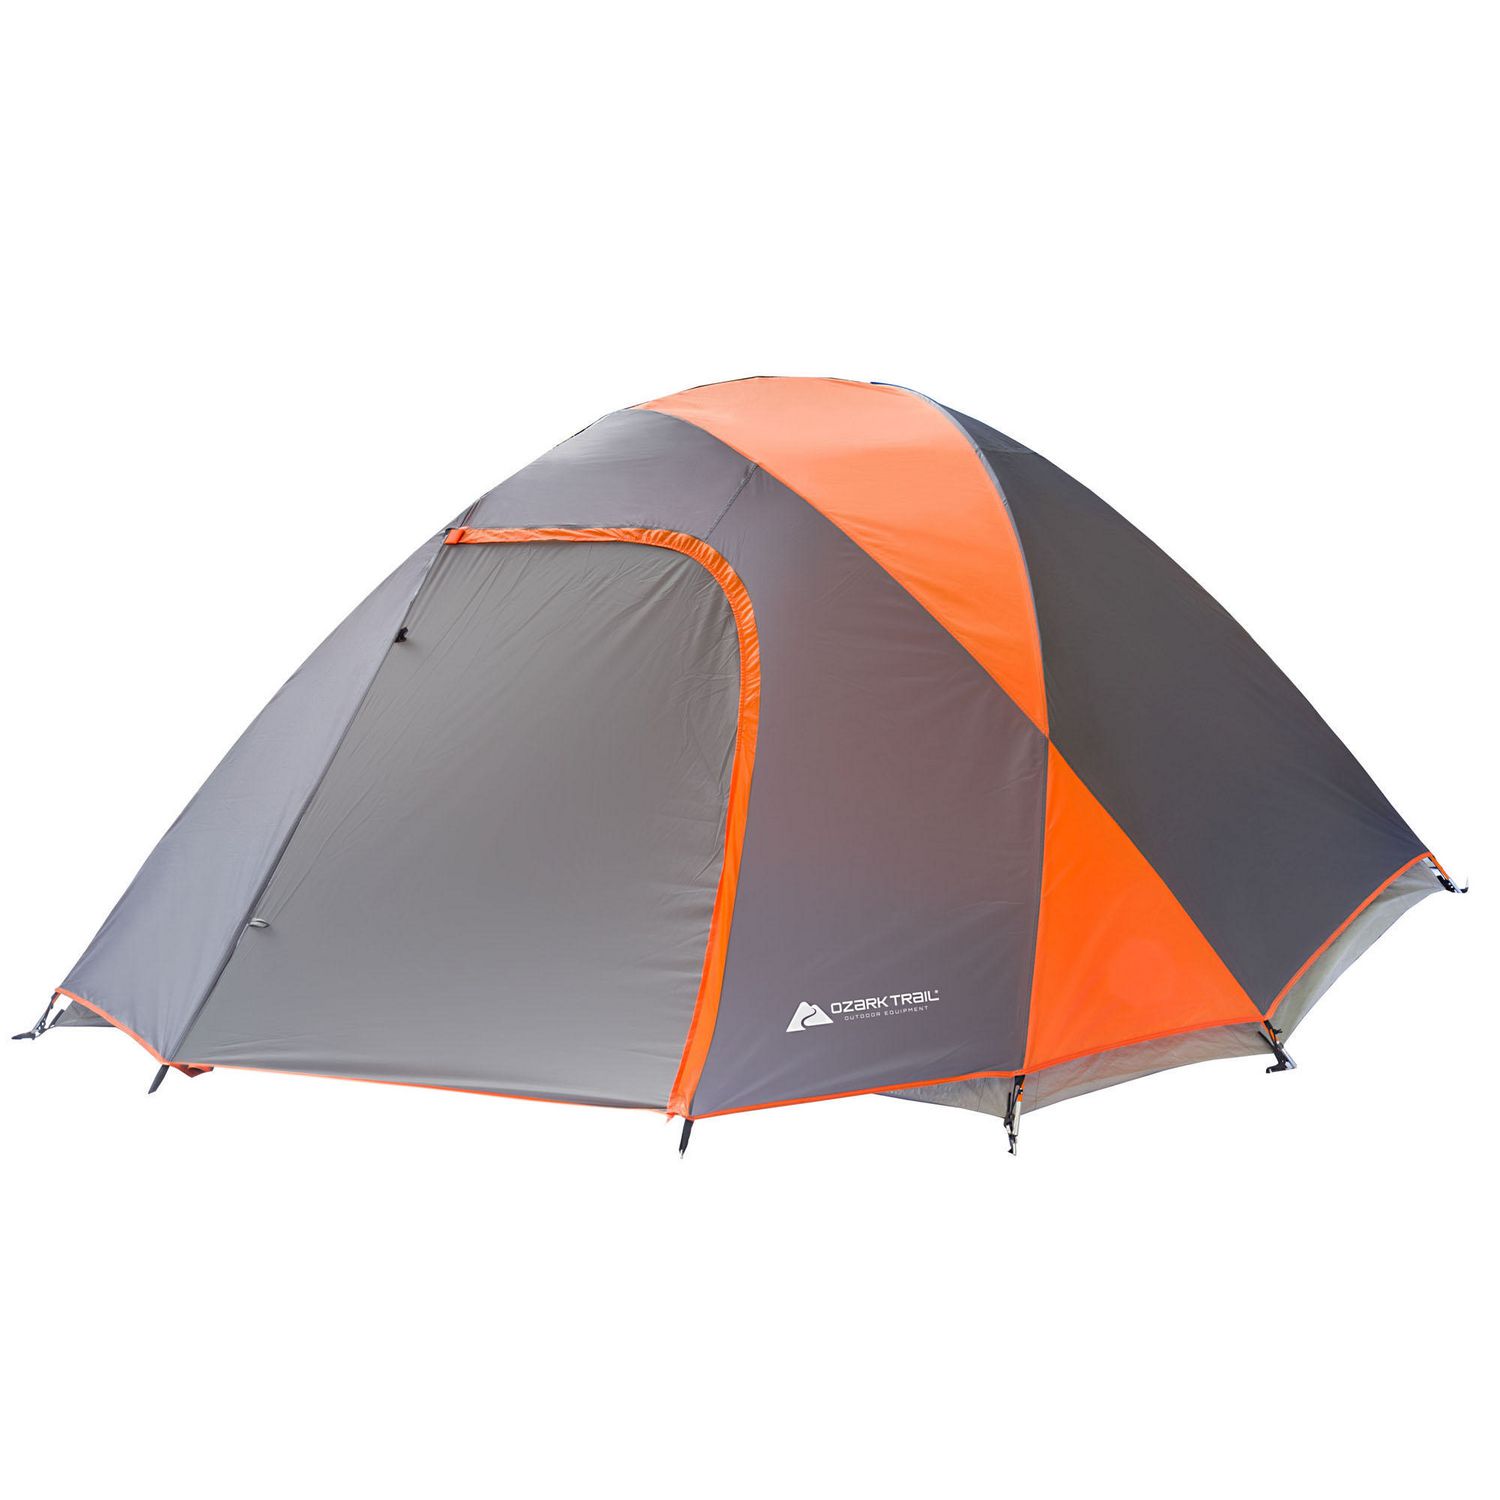 NEW Ozark Trail 5-Person Camping SUV Tent Sleeping Outdoor Family Rainfly Dome 